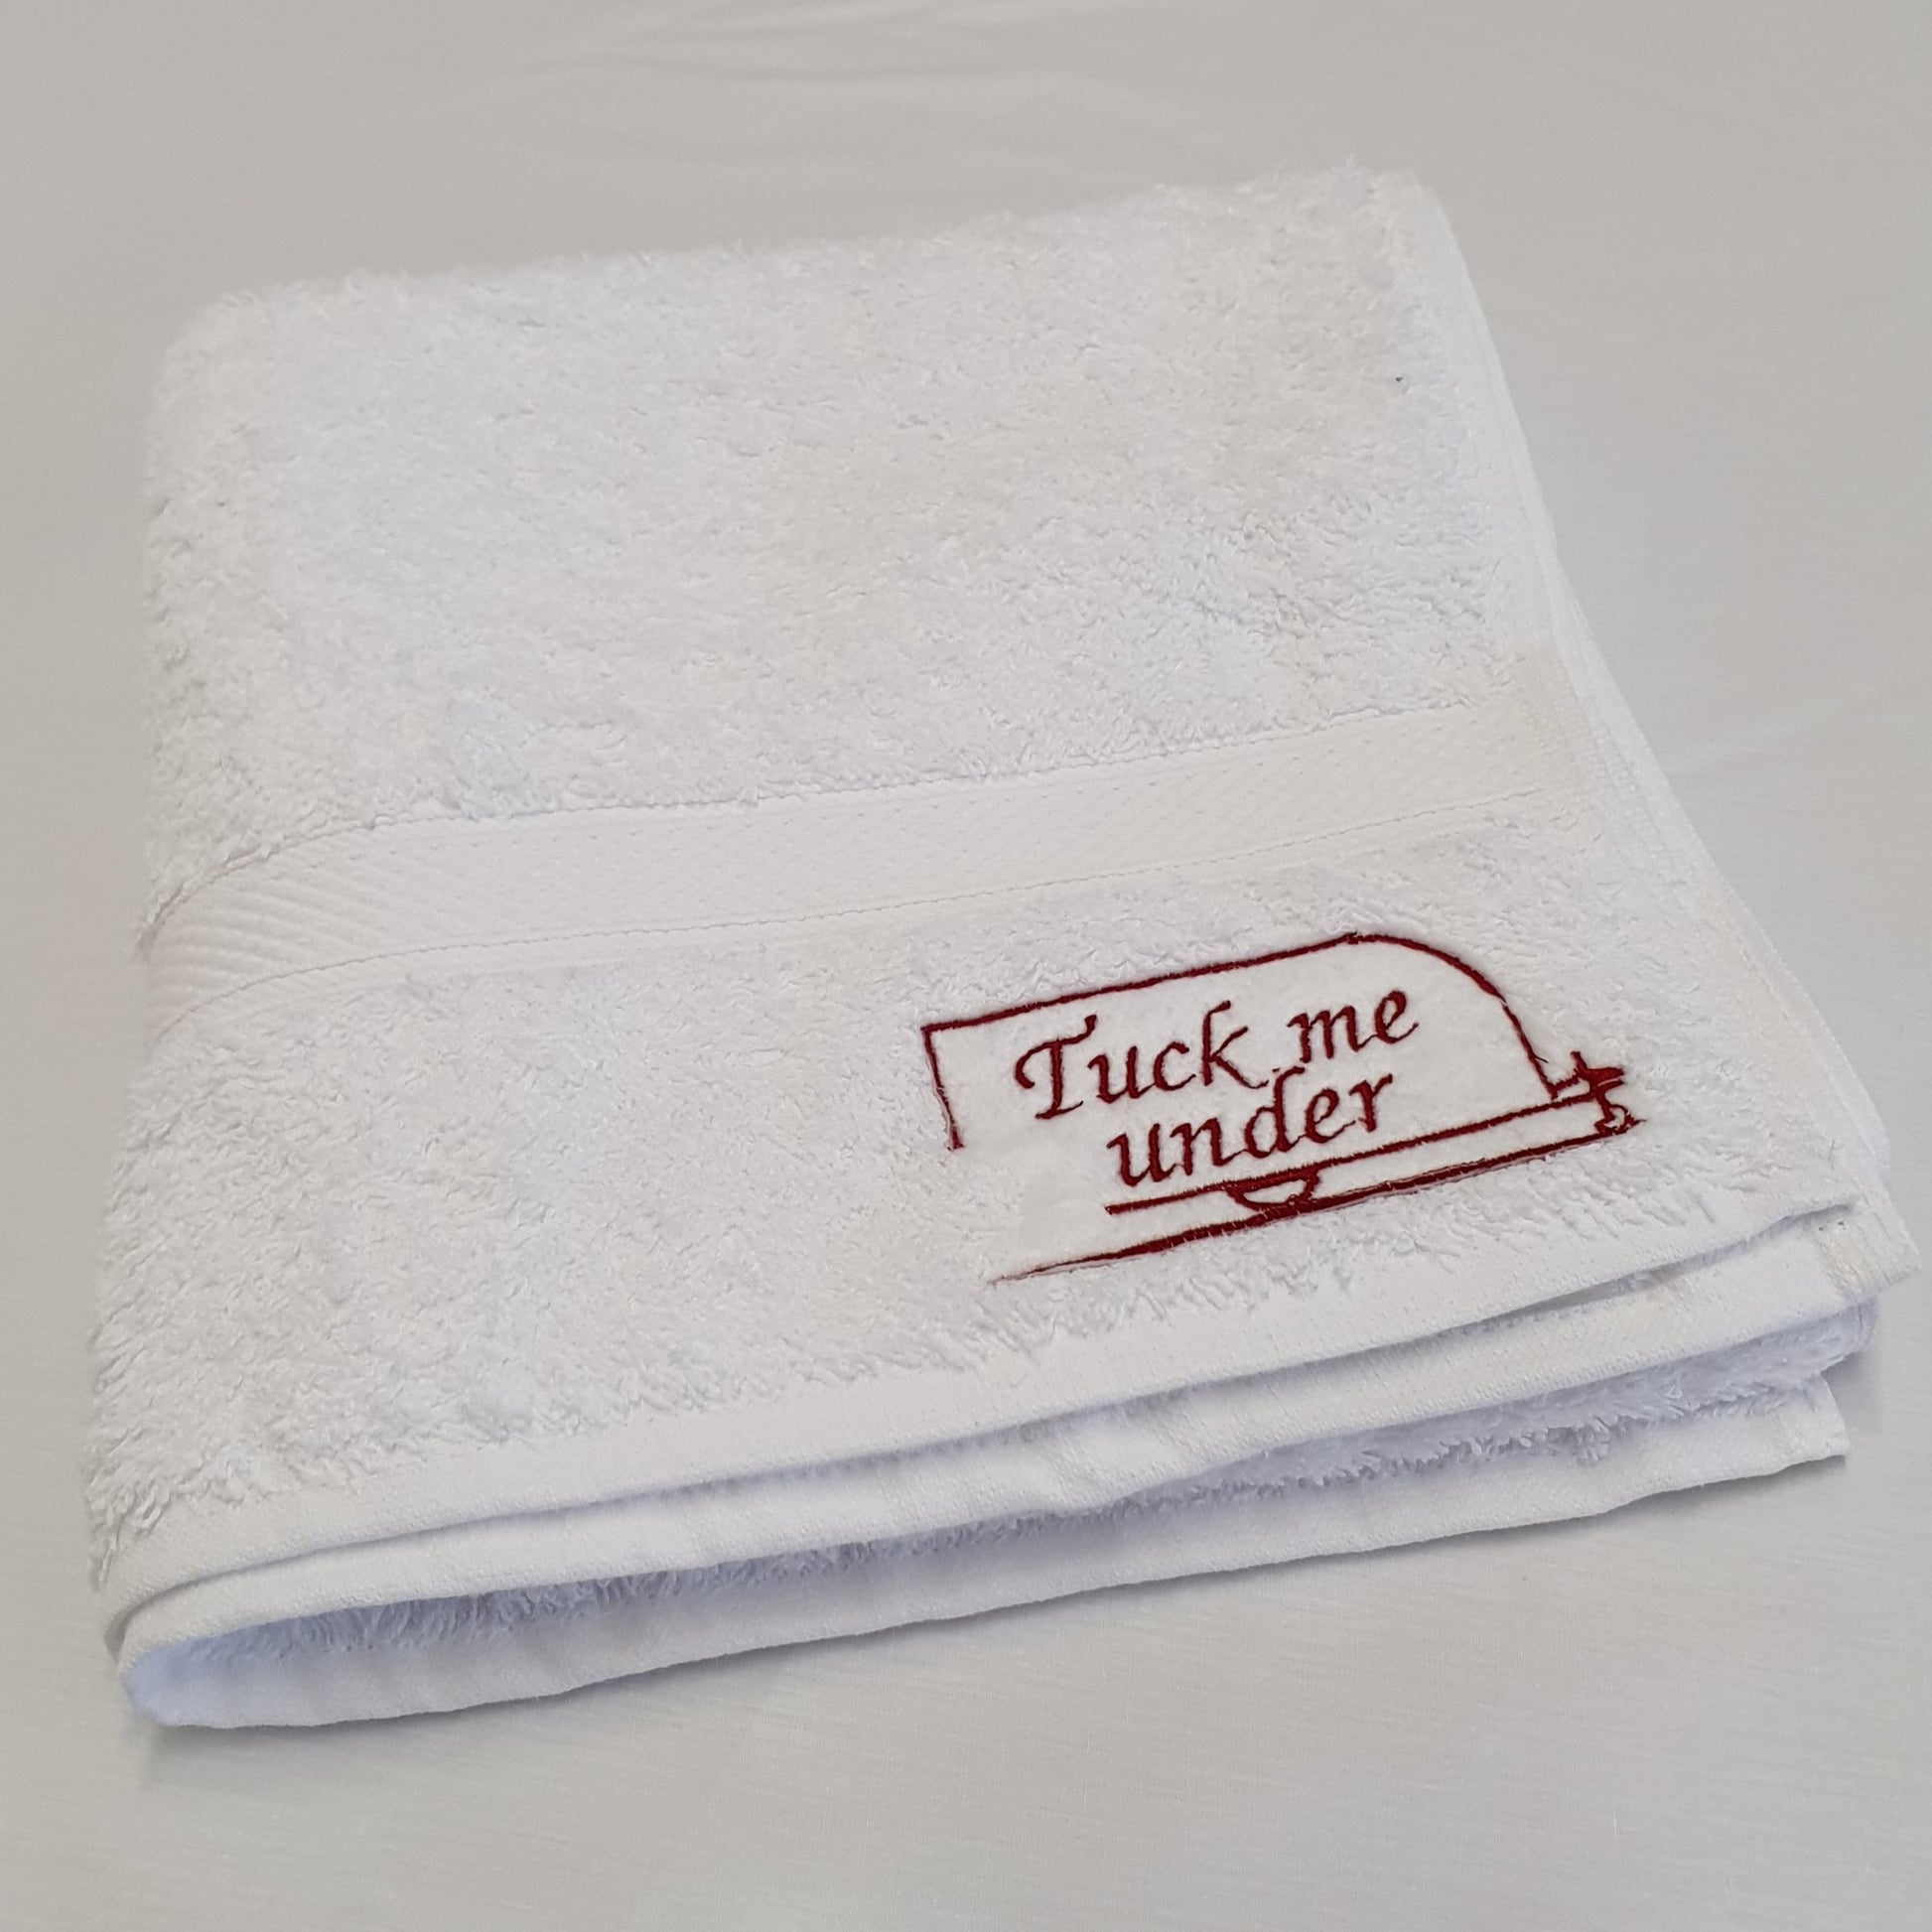 Hand towel with embroidered caravan